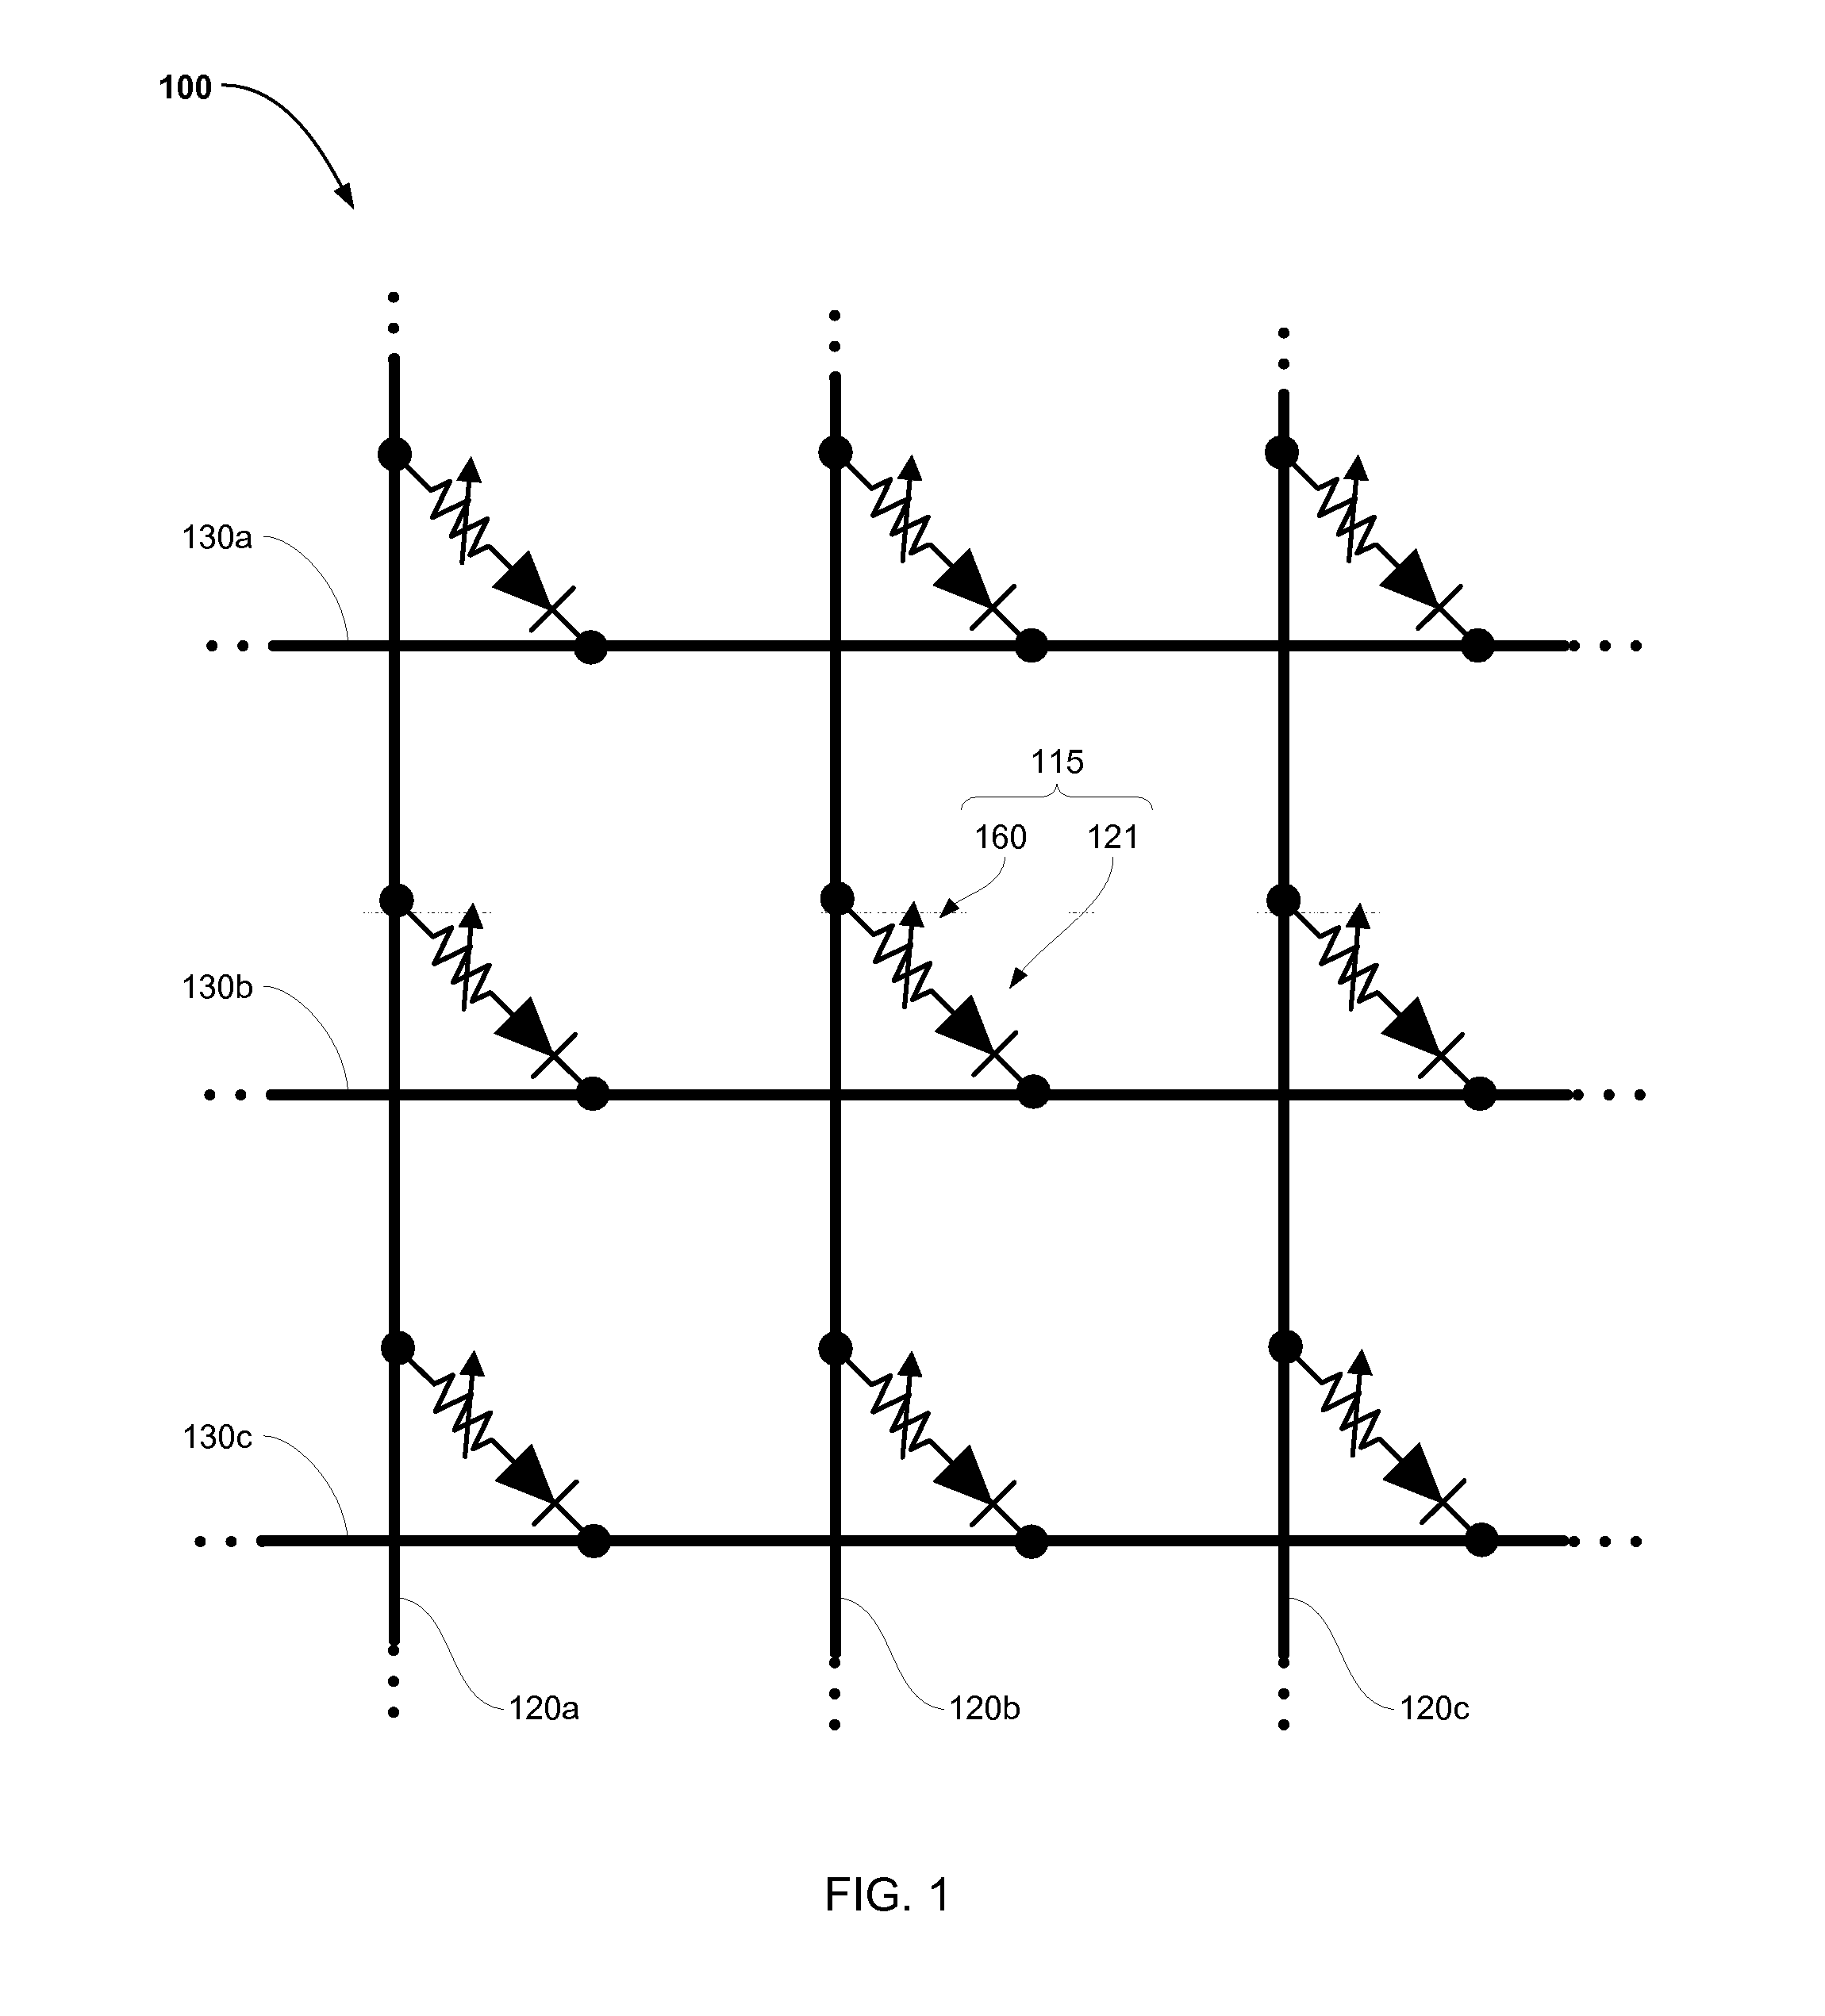 Memory cell access device having a pn-junction with polycrystalline and single-crystal semiconductor regions